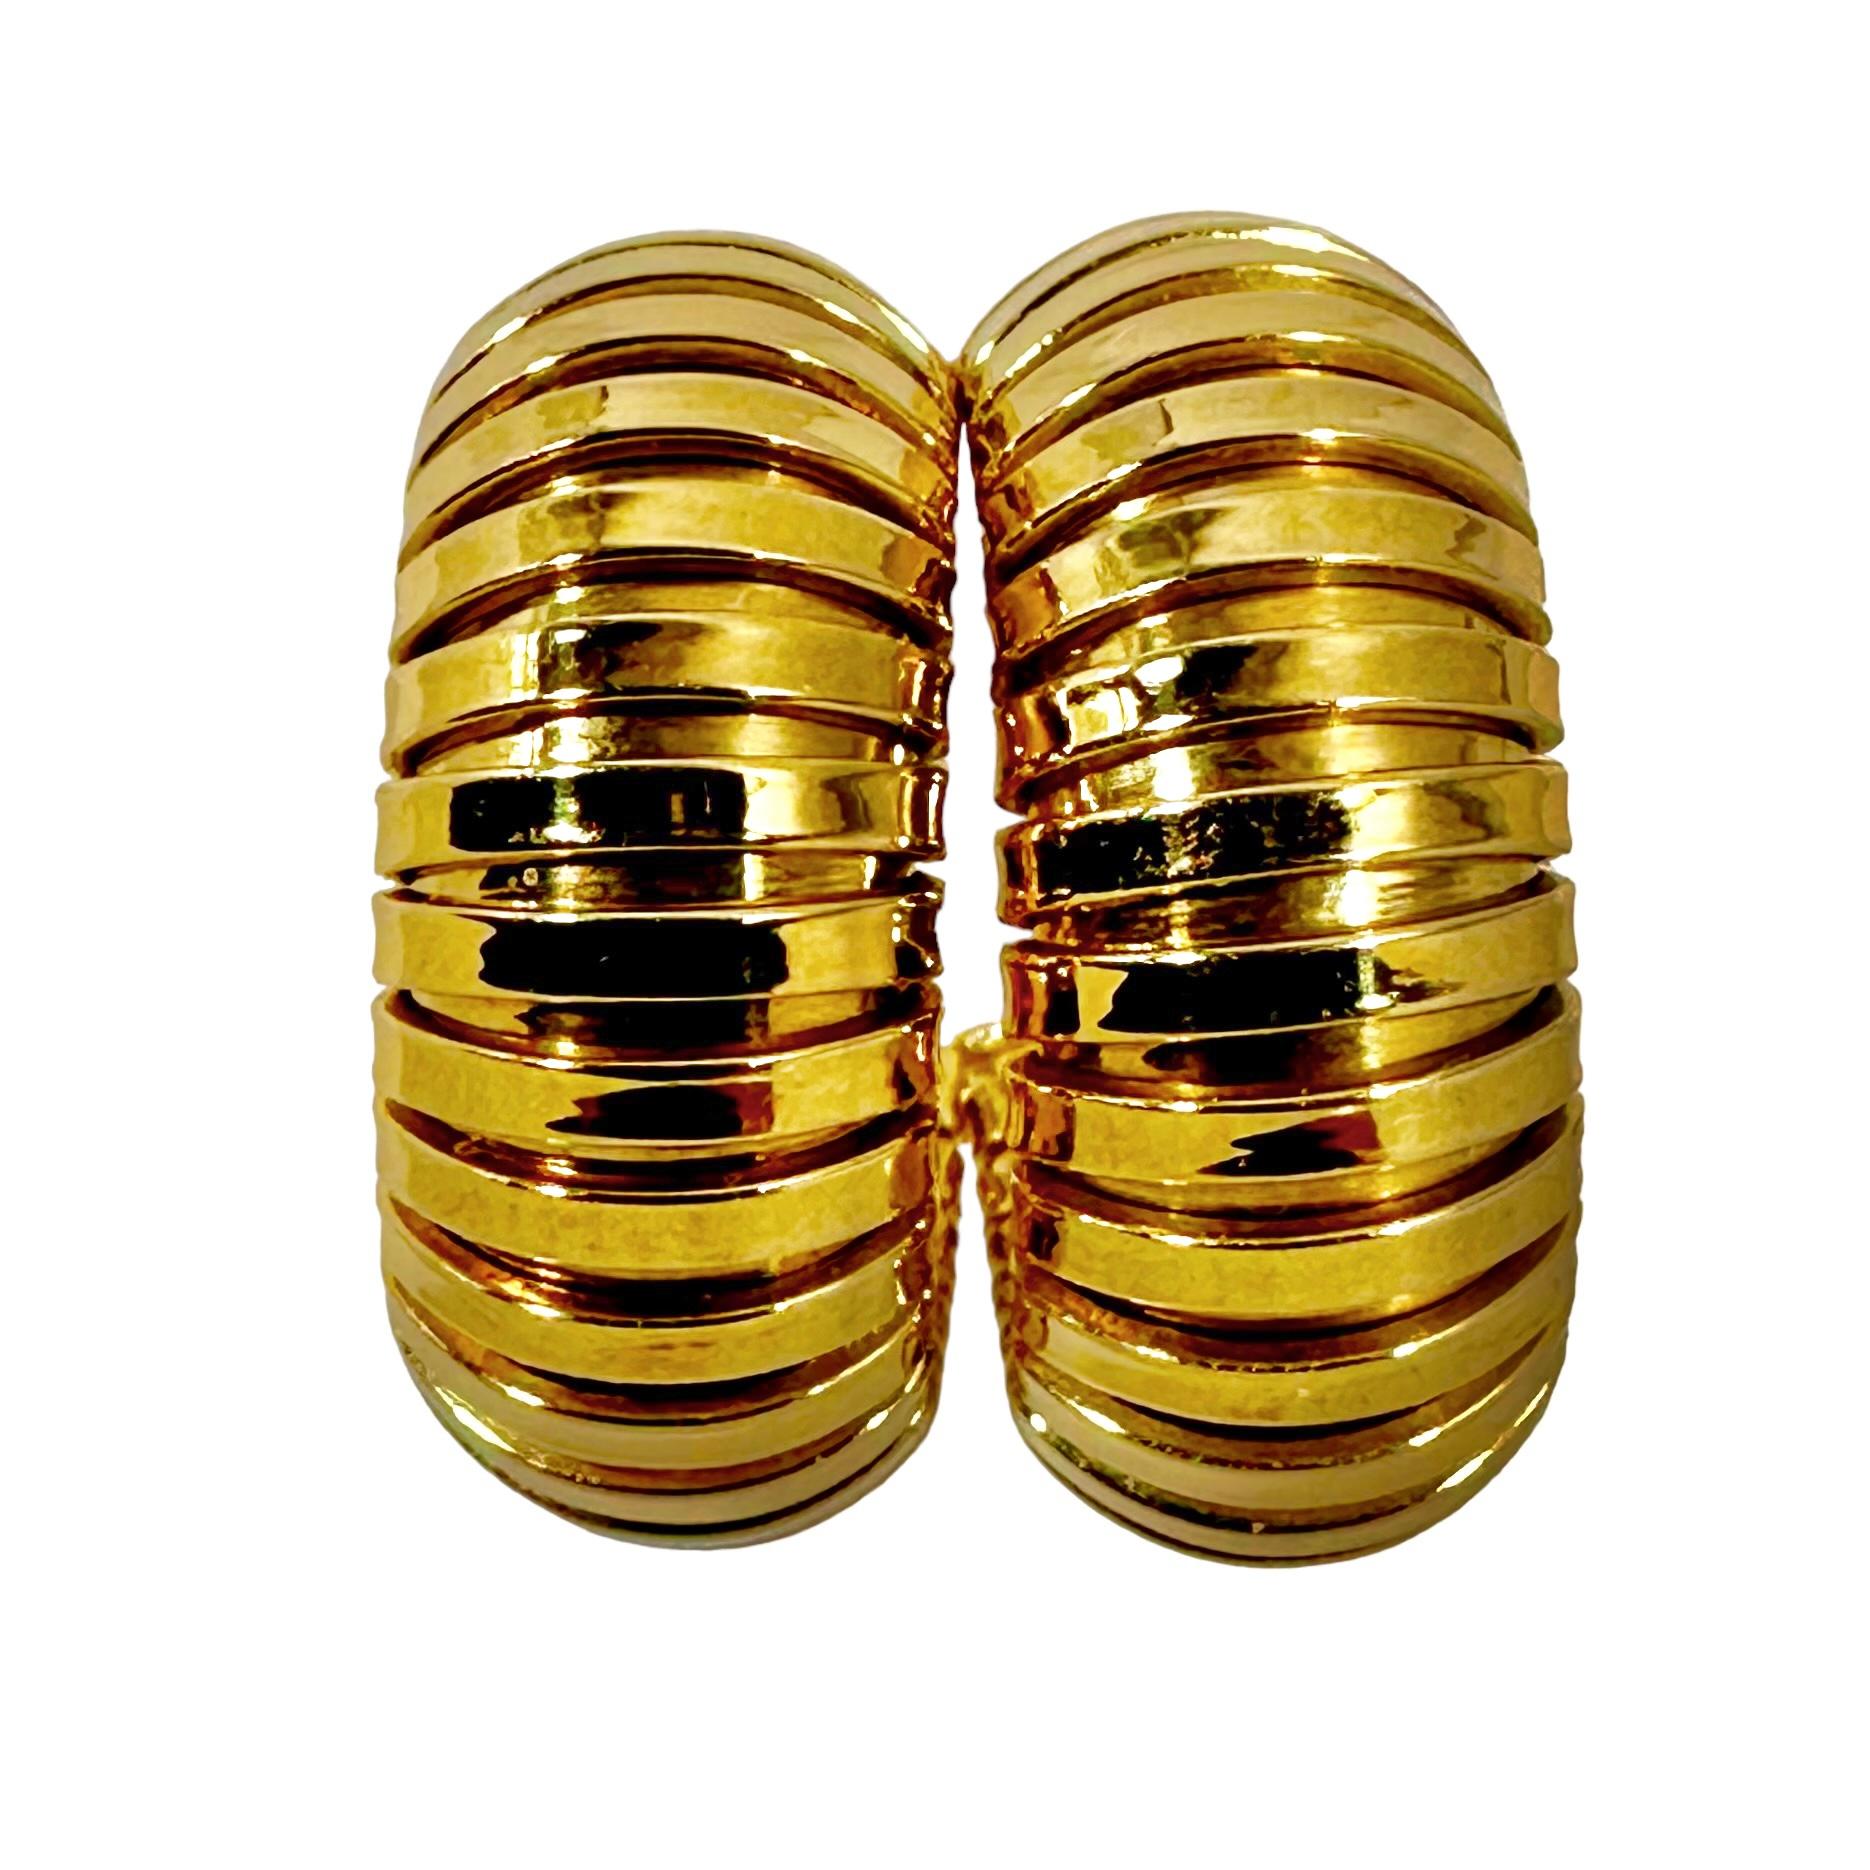 This like new pair of 18k yellow gold, Italian Tubogas hoop earrings, made by Herco, are very high gauge and quality. With a diameter of 7/8 inch and a width of 3/8 inch, they are not overwhelming, nor are they diminutive. A great pair of stylish